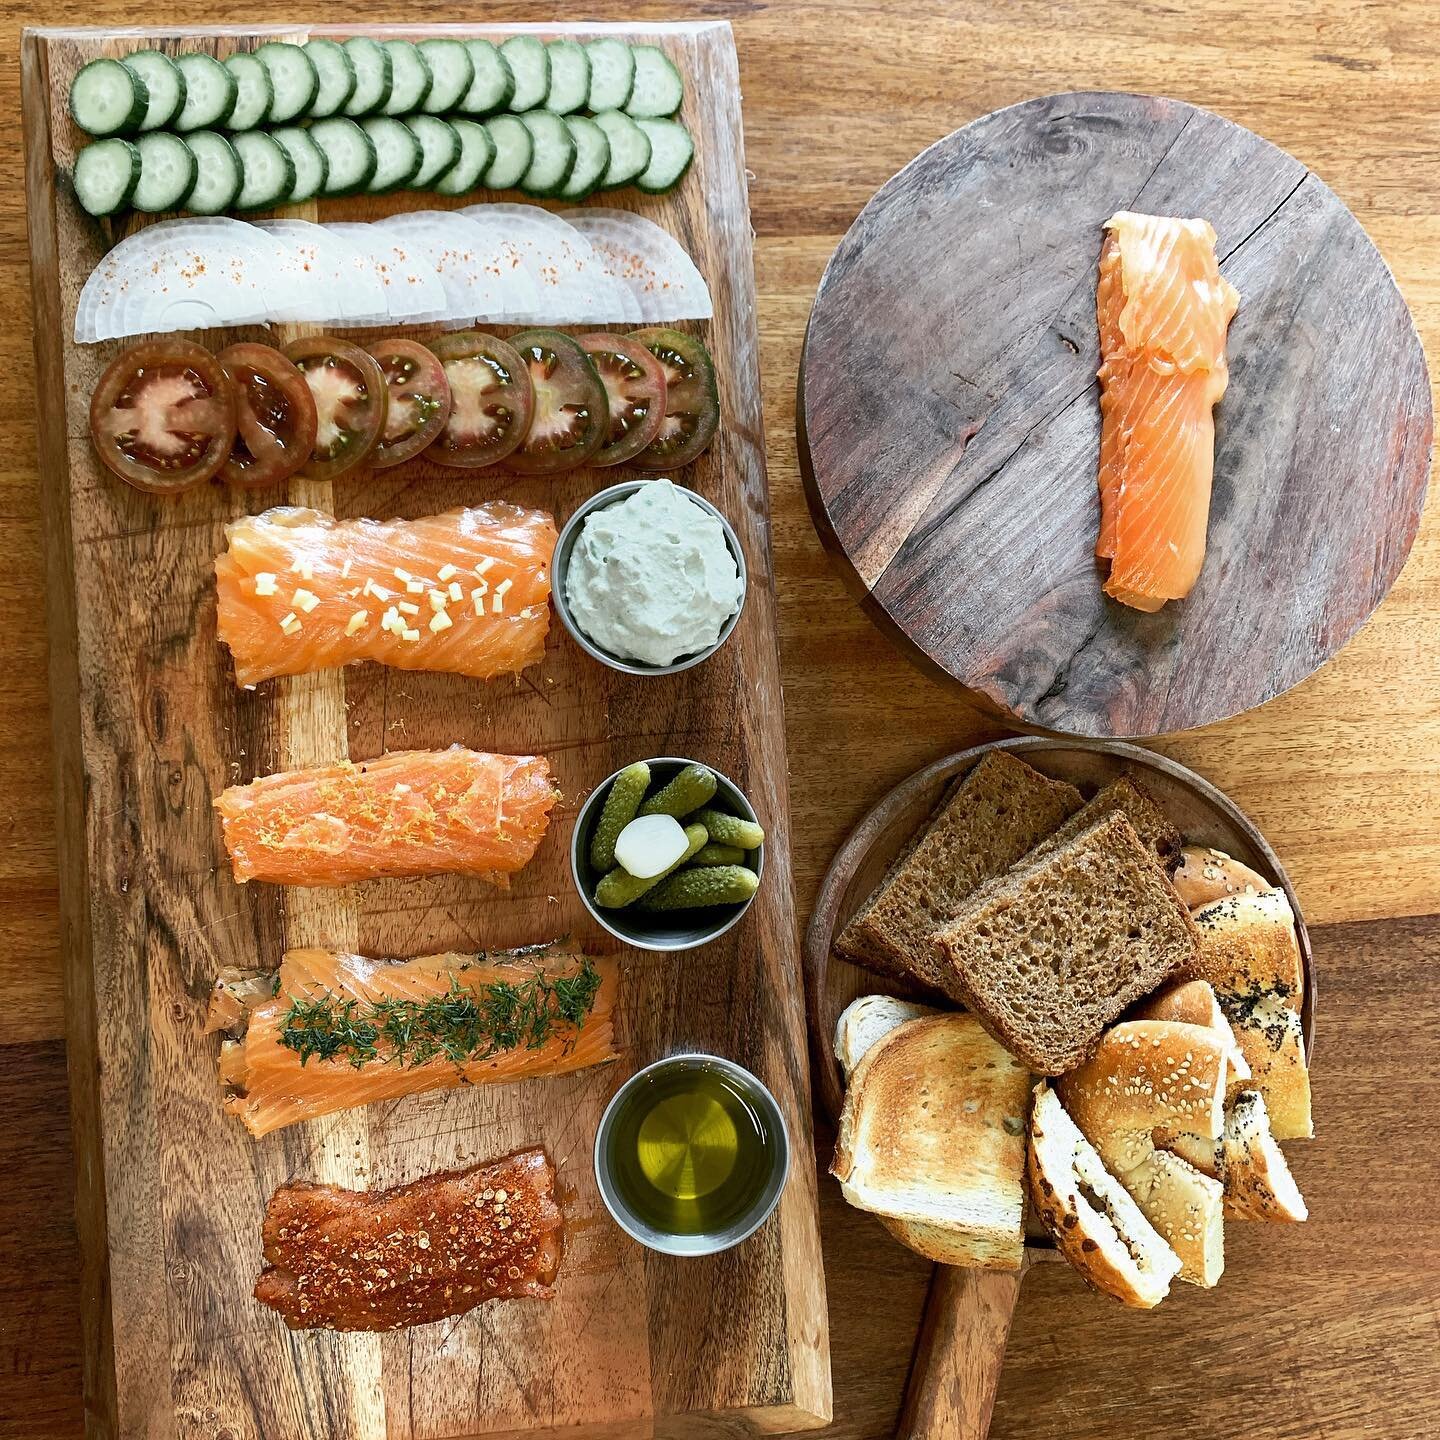 Now available at Greenwich &amp; Delancey, the Lox Five Ways! Enjoy a shareable sampling of our five distinctive lox selections!

As made famous by @loxbydavidteyf 

.
.
.

#kosherfood #kosherfoodie #kosherrestaurant #GD #greenwichanddelancey #kosher